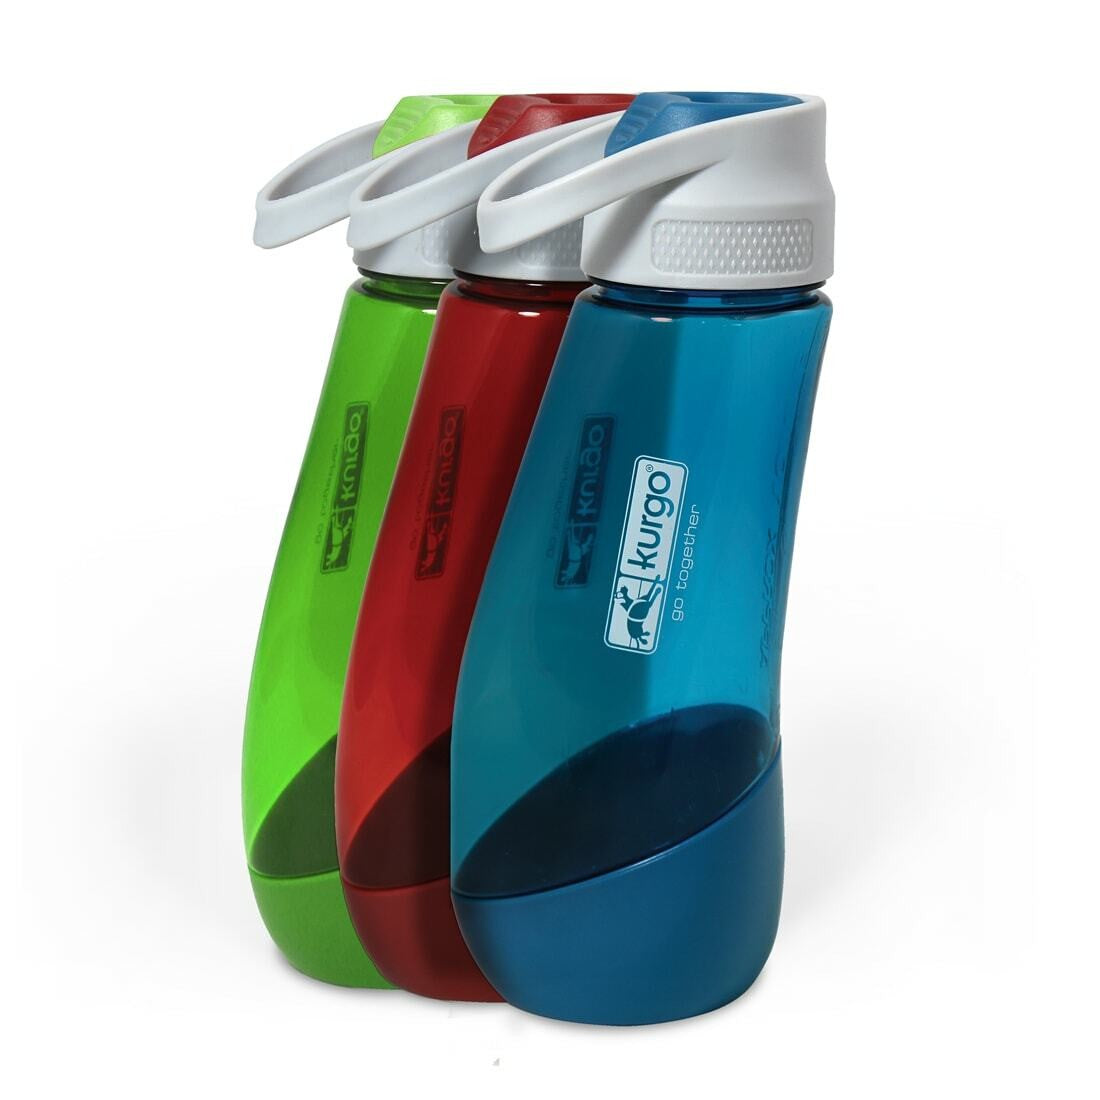 Three angled water bottles in green, red, and blue colors.